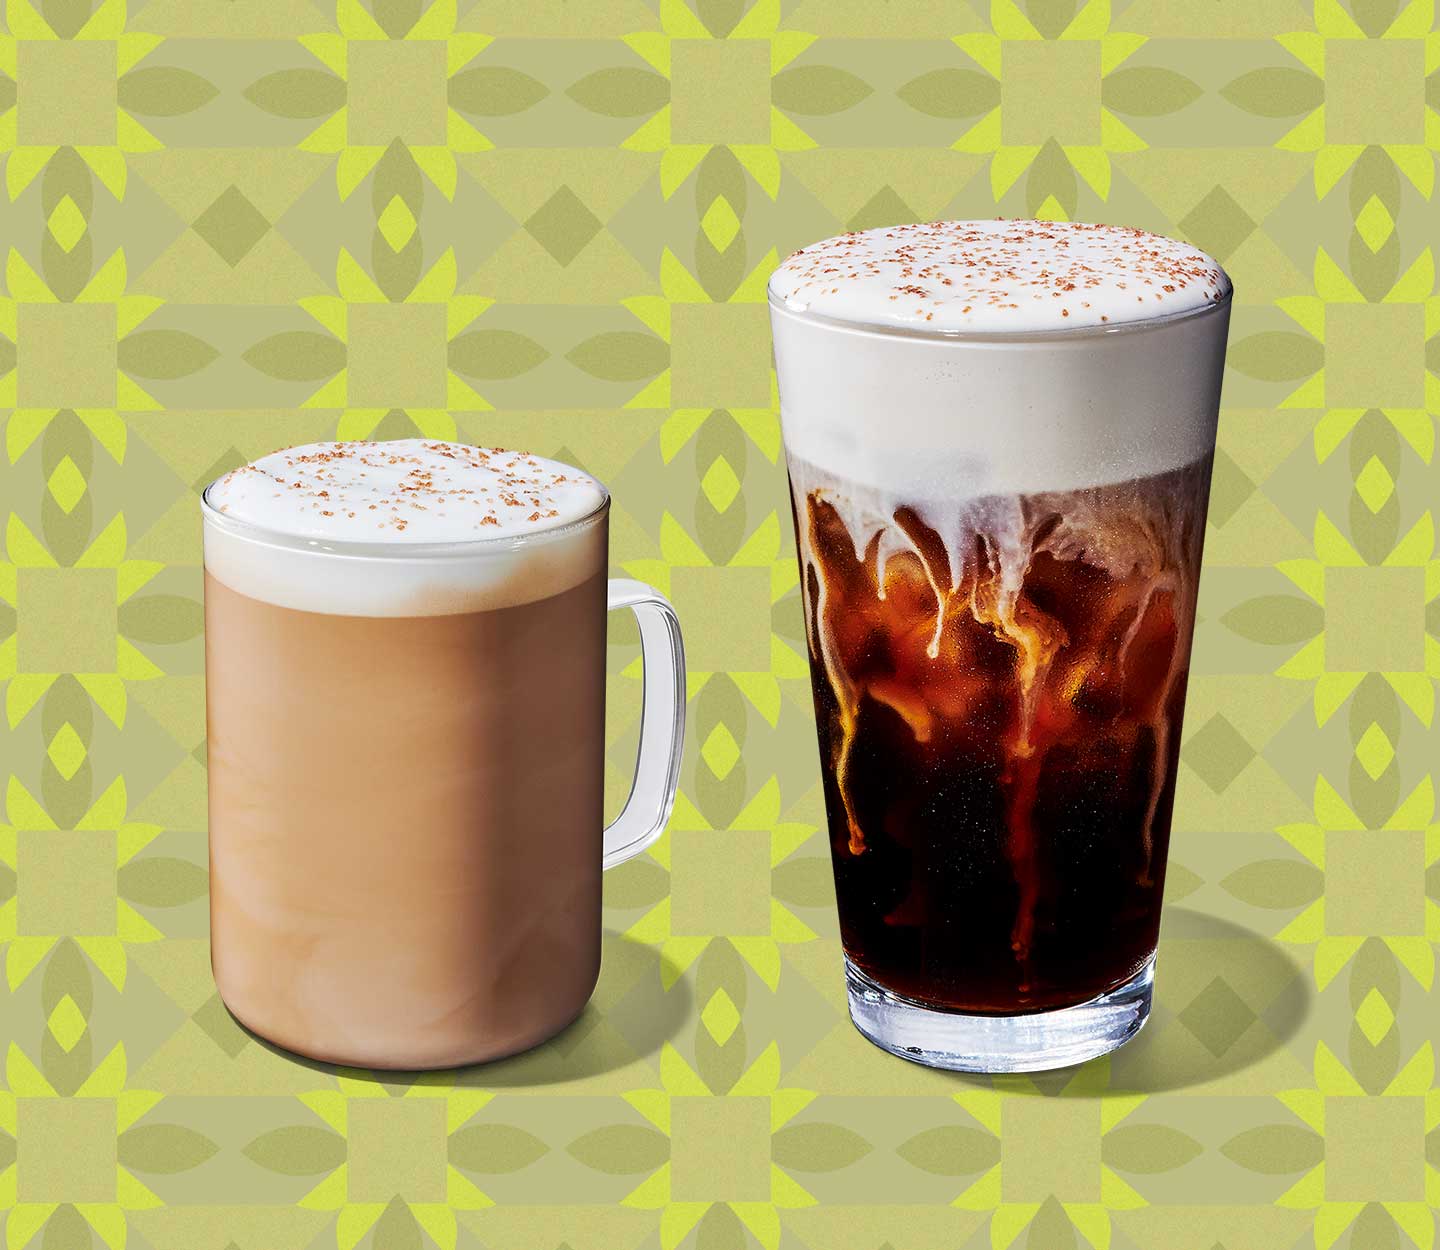 A latte with crema on top next to a cold coffee with frothy topping, both in clear glasses.